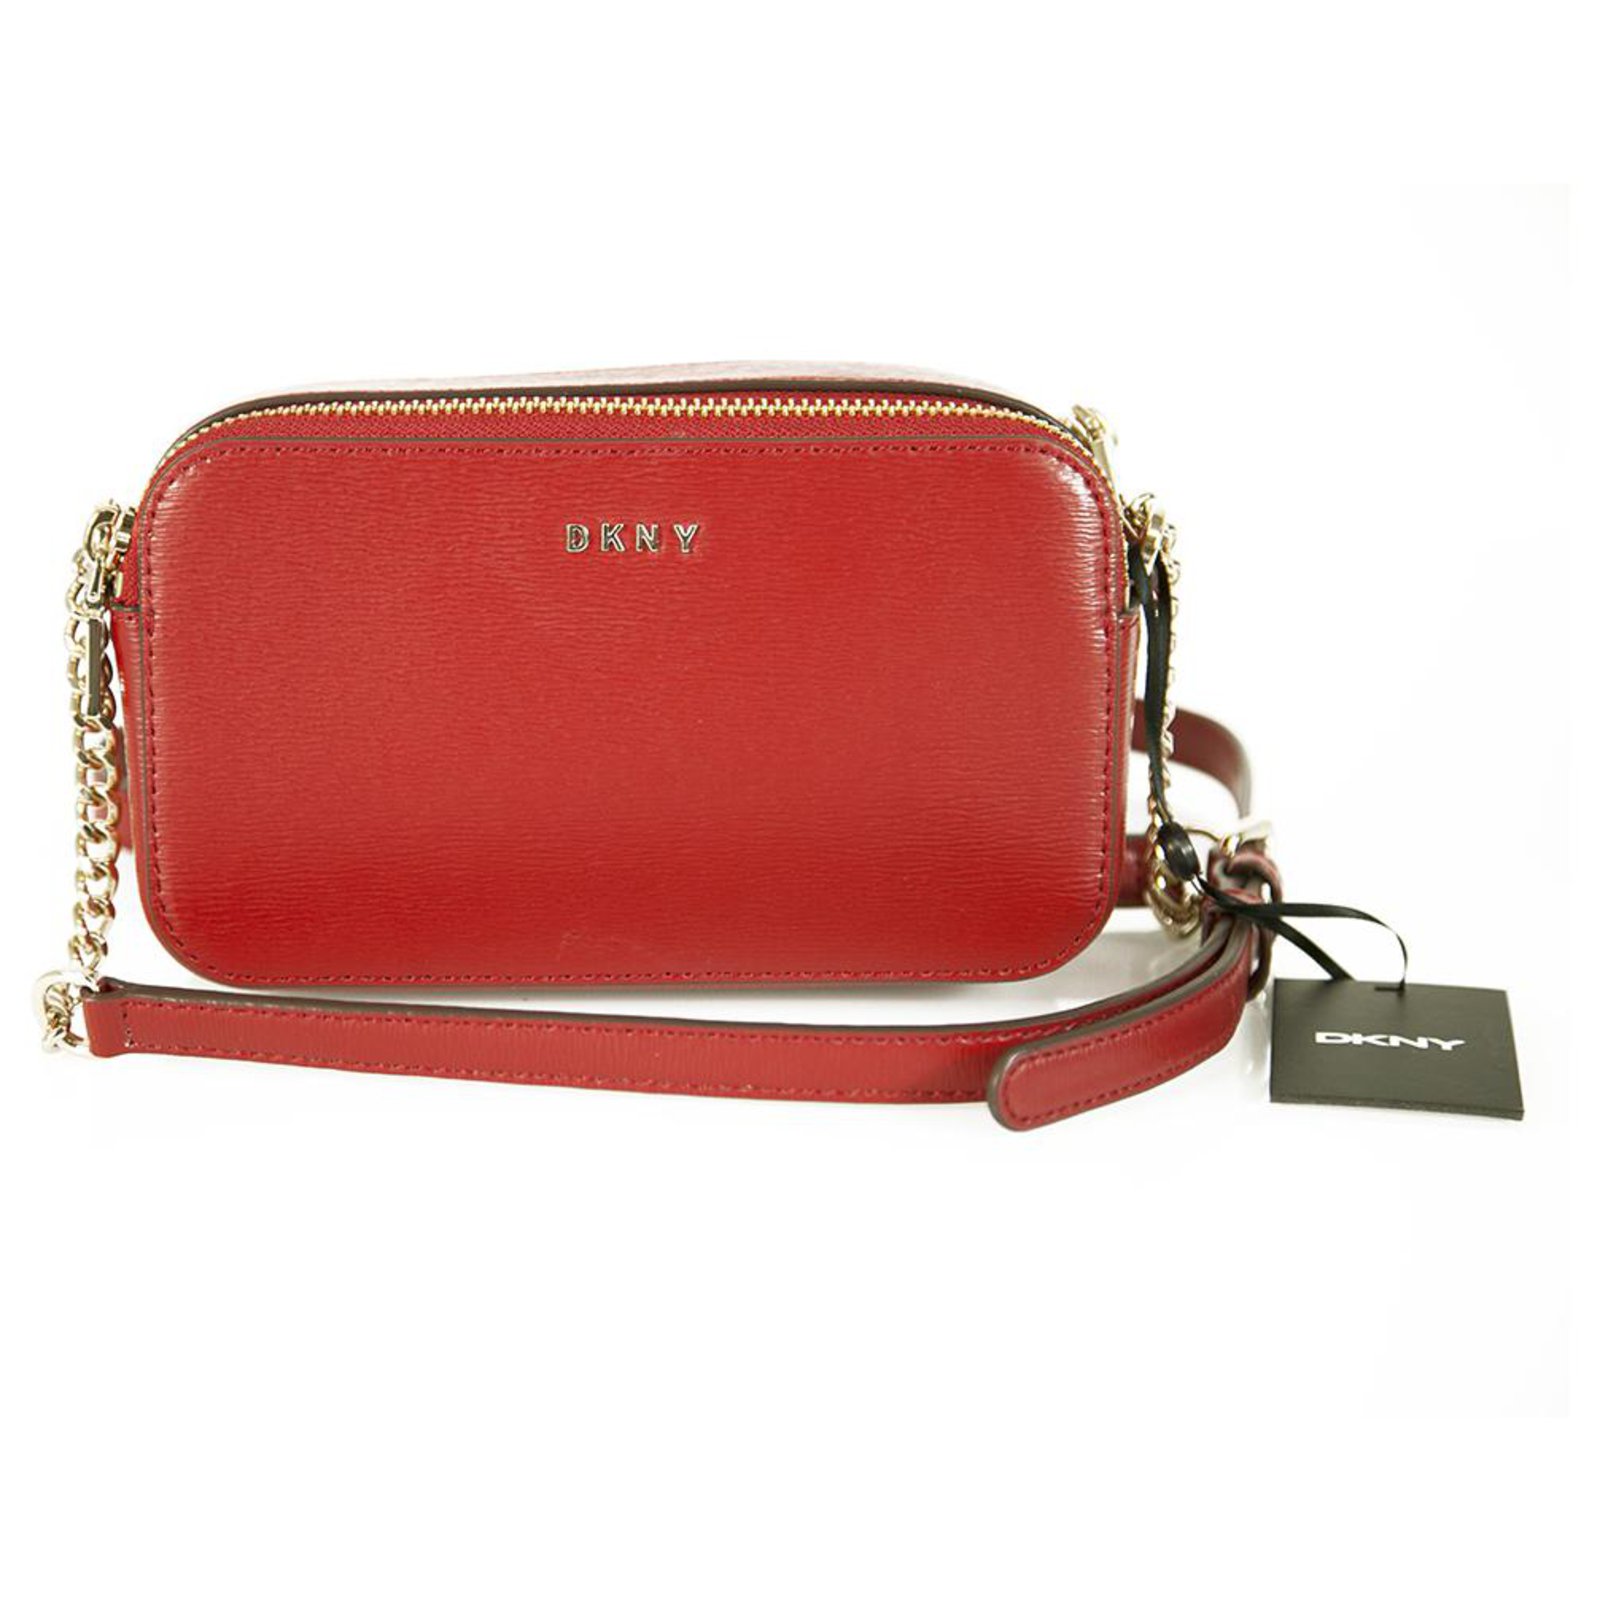 Dkny Shoulder Bag - Elissa Large Shoulder Bag Bright Red - in red -...  ($350) ❤ liked on Polyvore featuring bags, handba… | Shoulder bag, Bags, Red  leather handbags